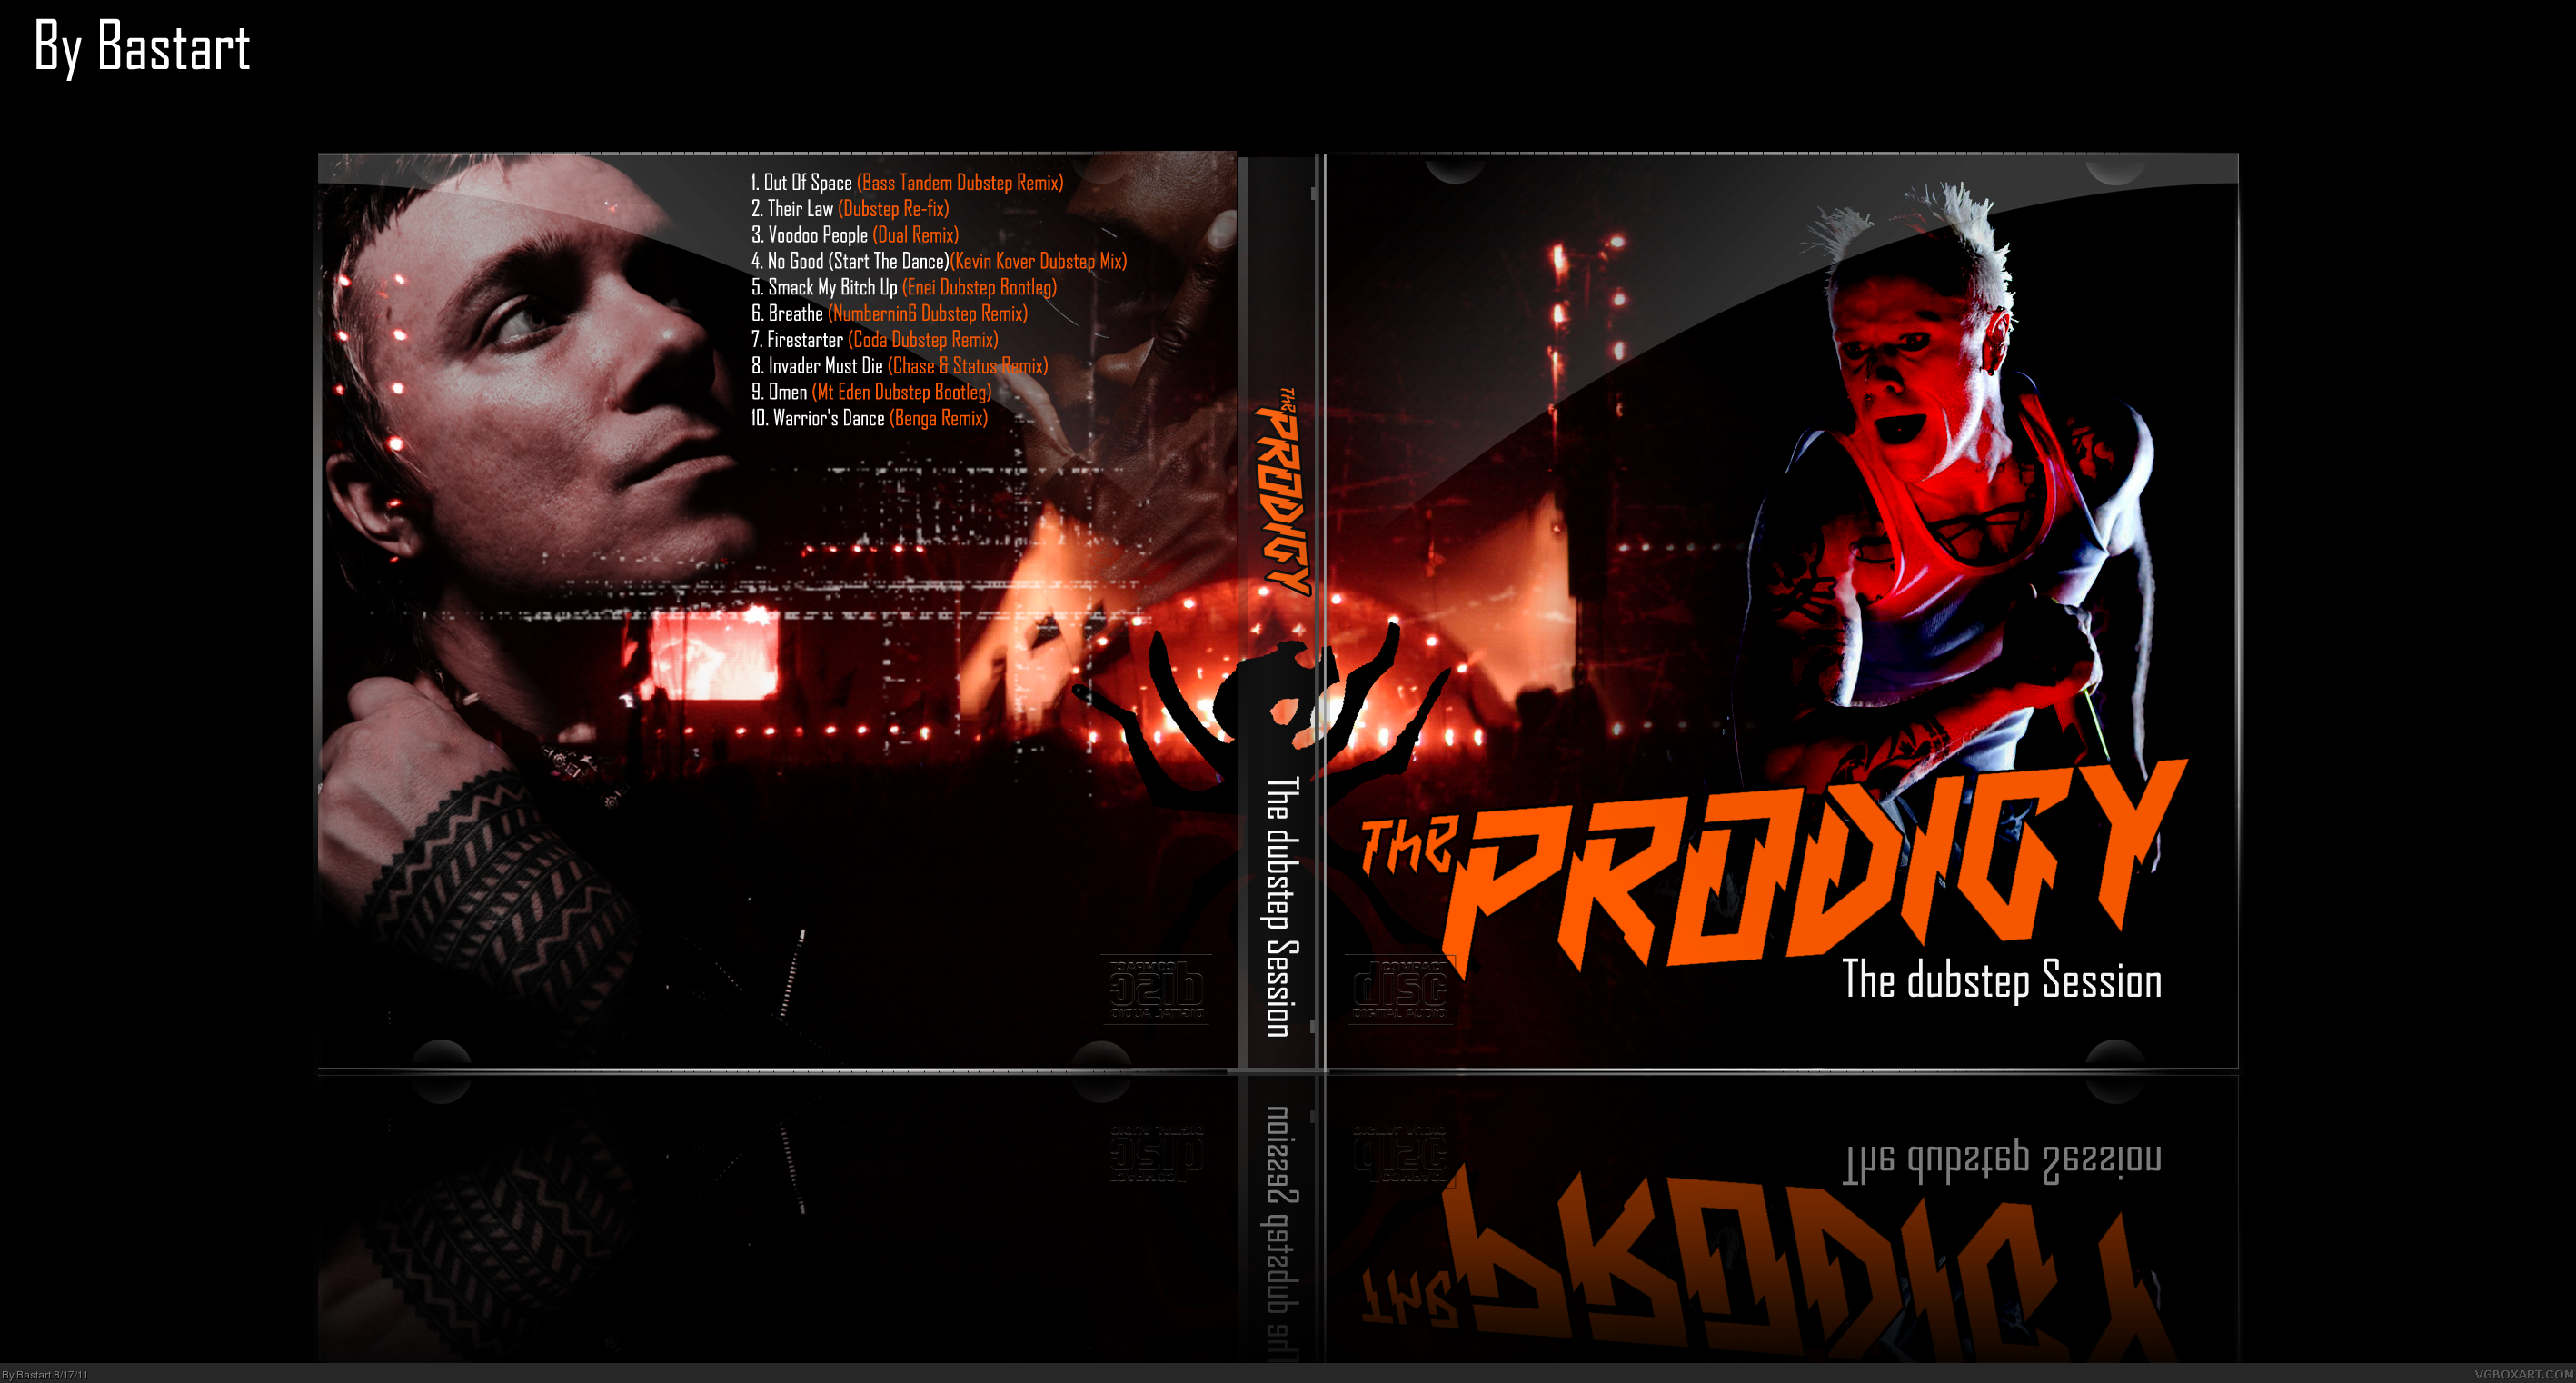 The Prodigy: The Dubstep Session box cover